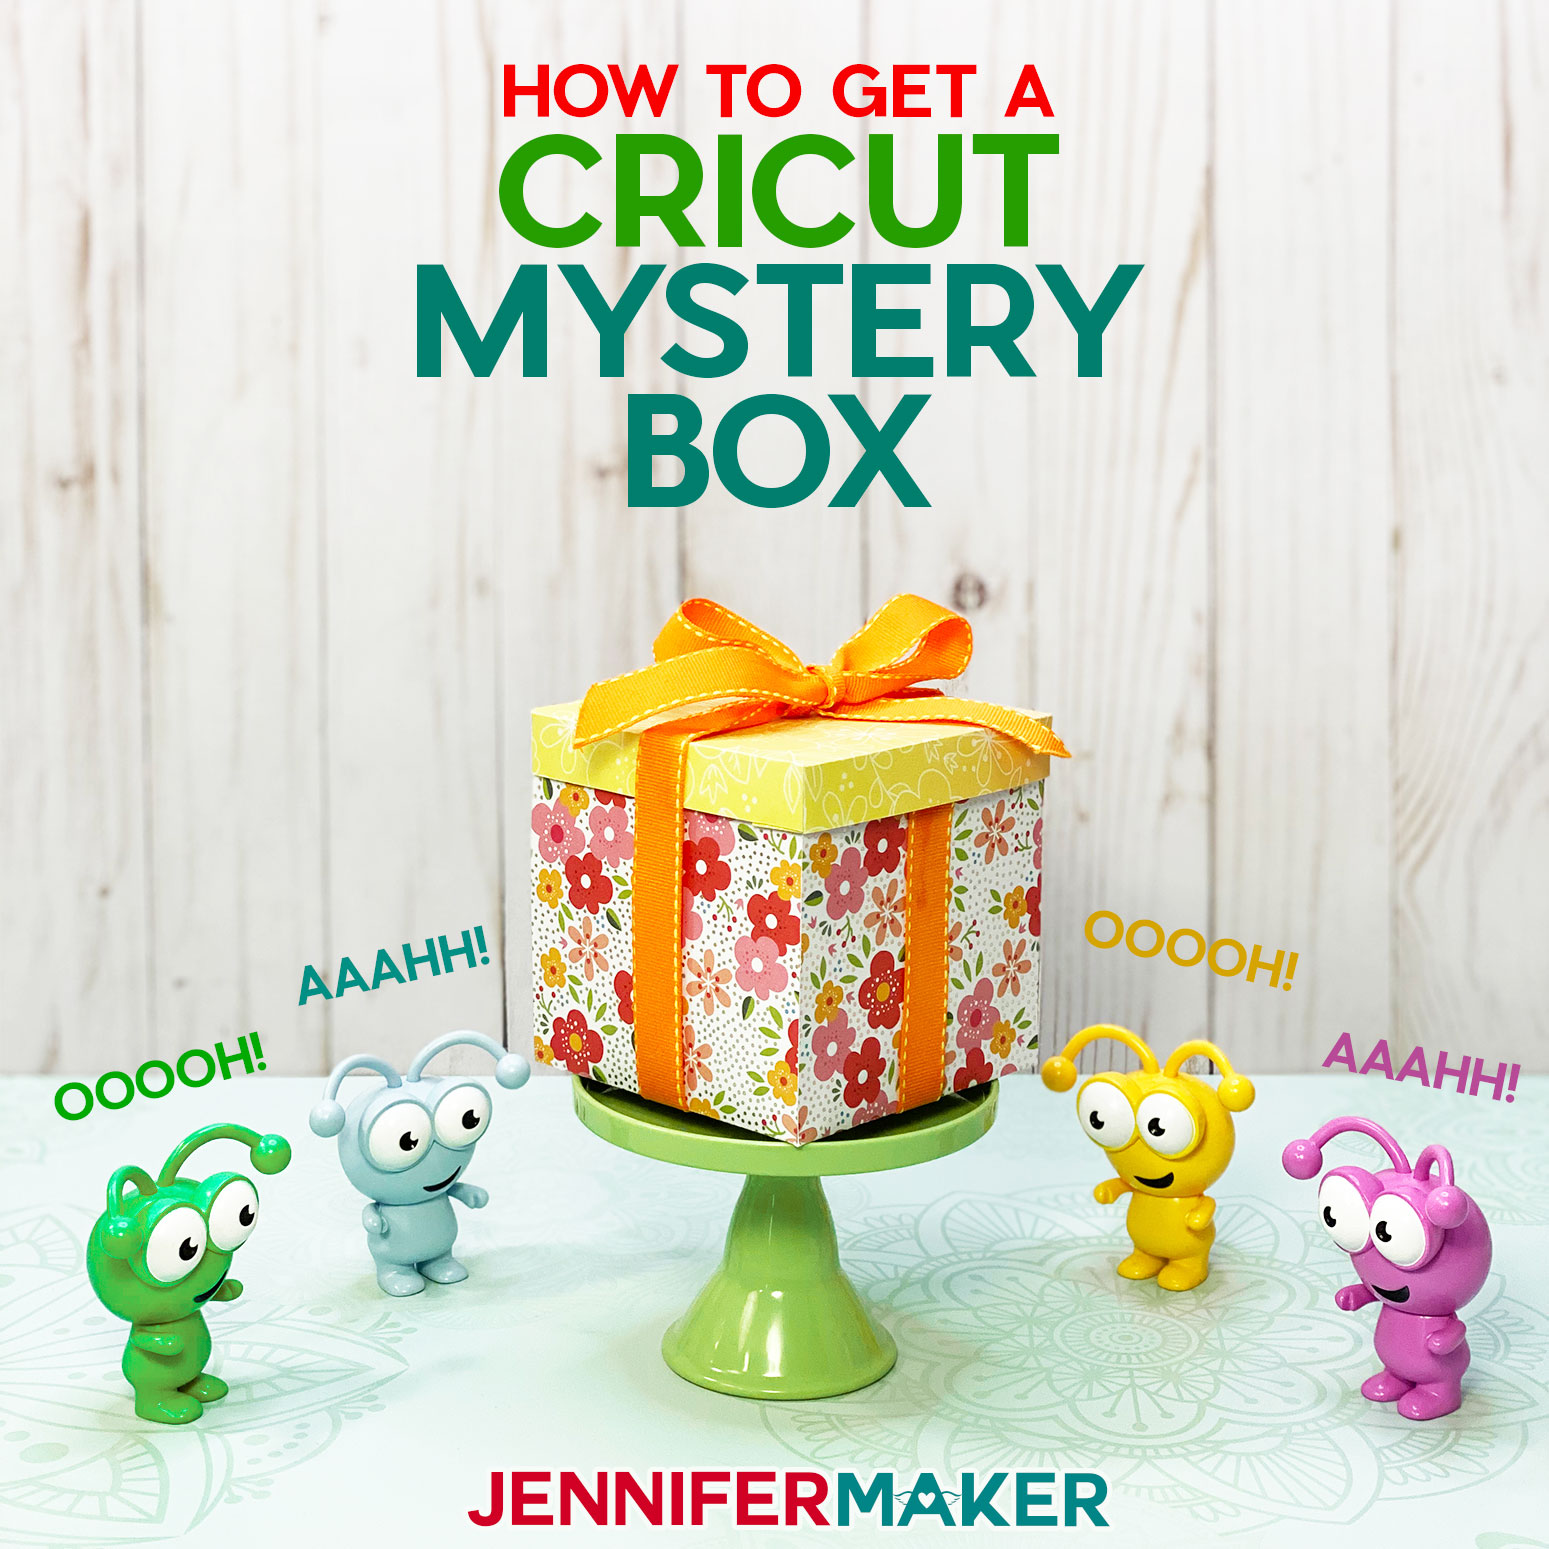 Cricut Mystery Box: What is it, how to get one, what's inside the box #cricut #craftsupplies